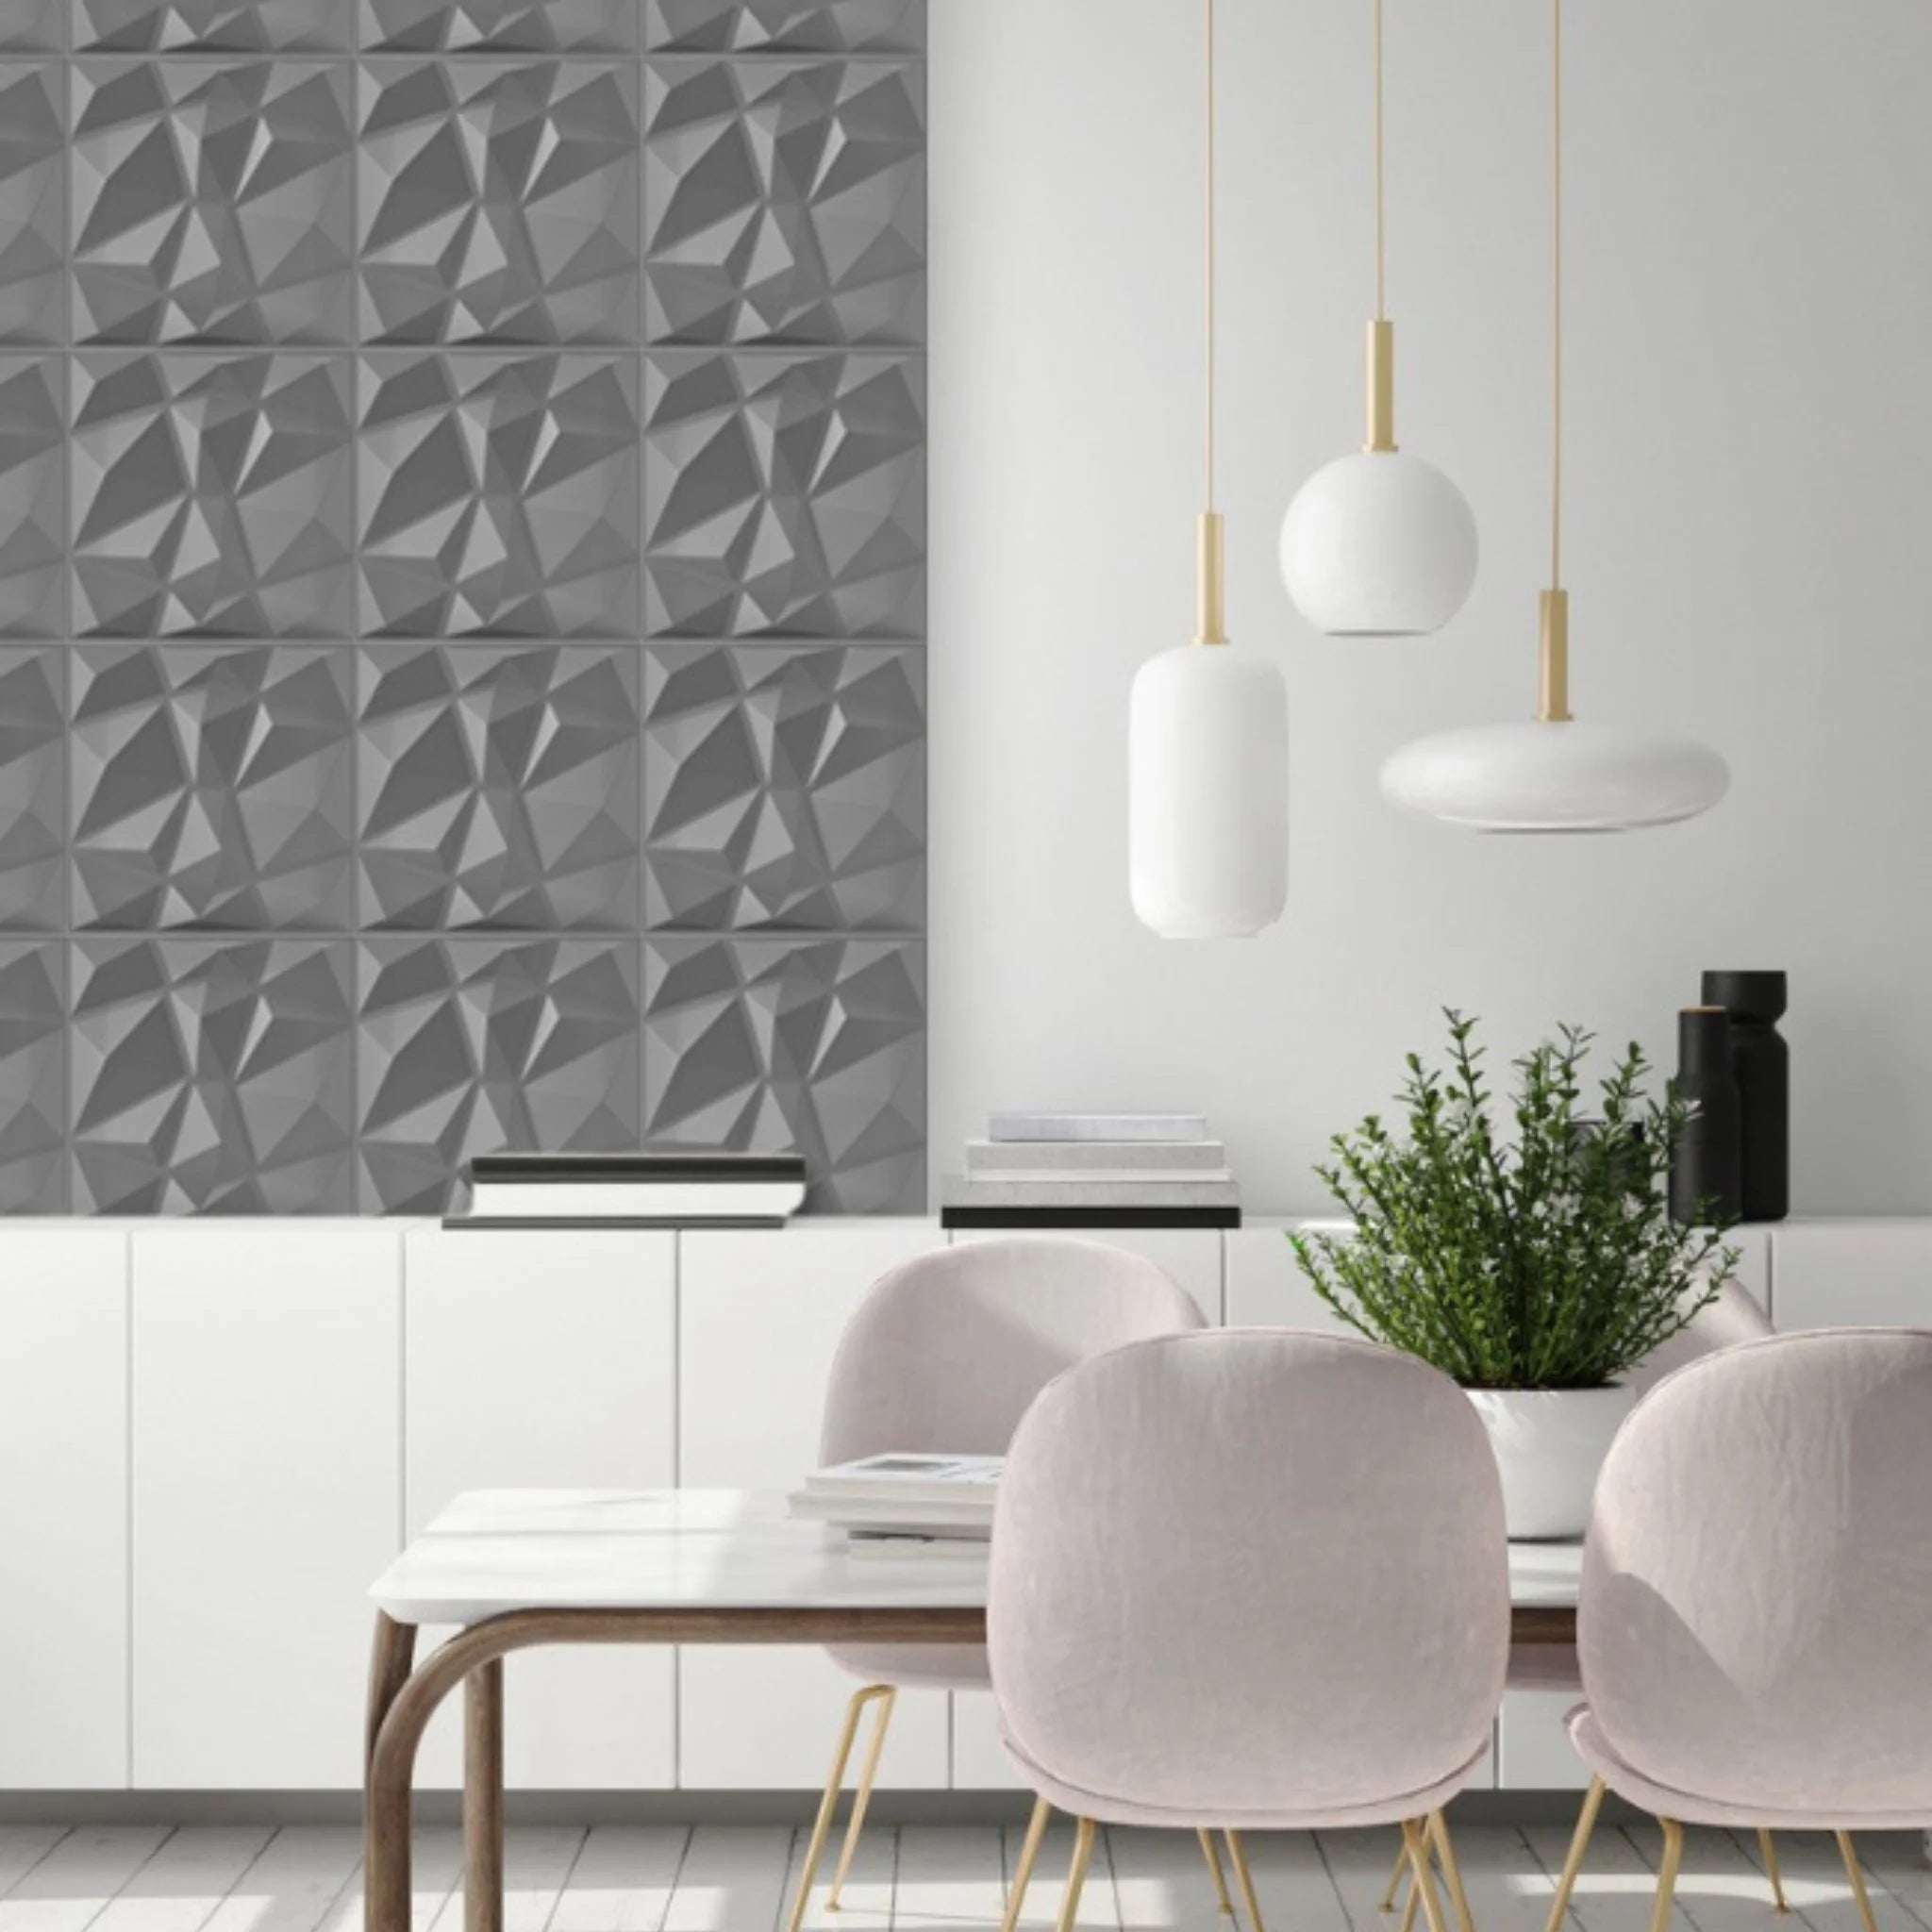 Dining room with silver square-patterned PVC wall panels and modern decor